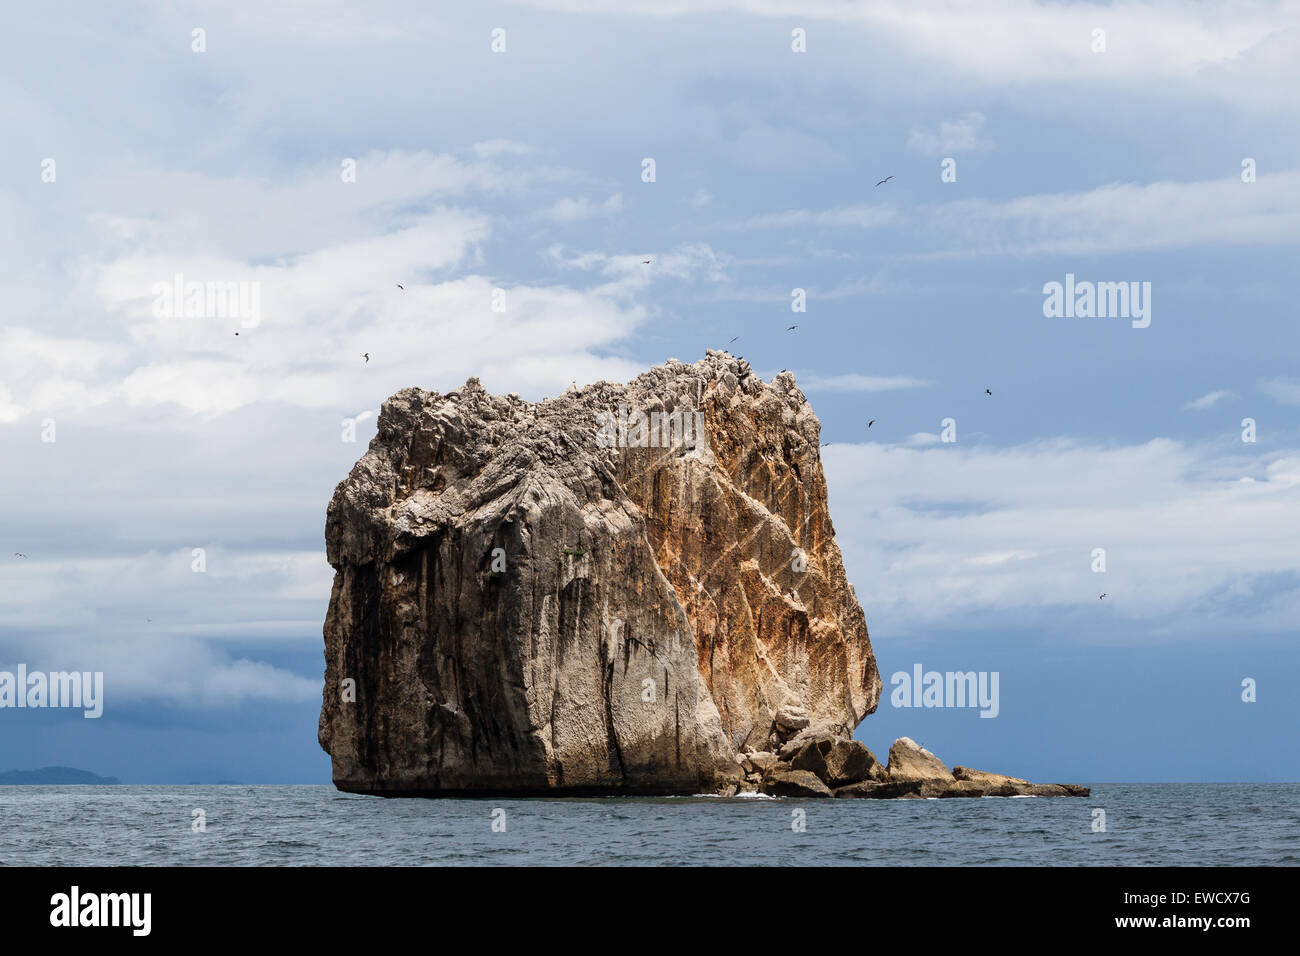 A view of the iconic Witch's Rock, home of some incredible surf, located near Tamarindo, Costa Rica. Stock Photo